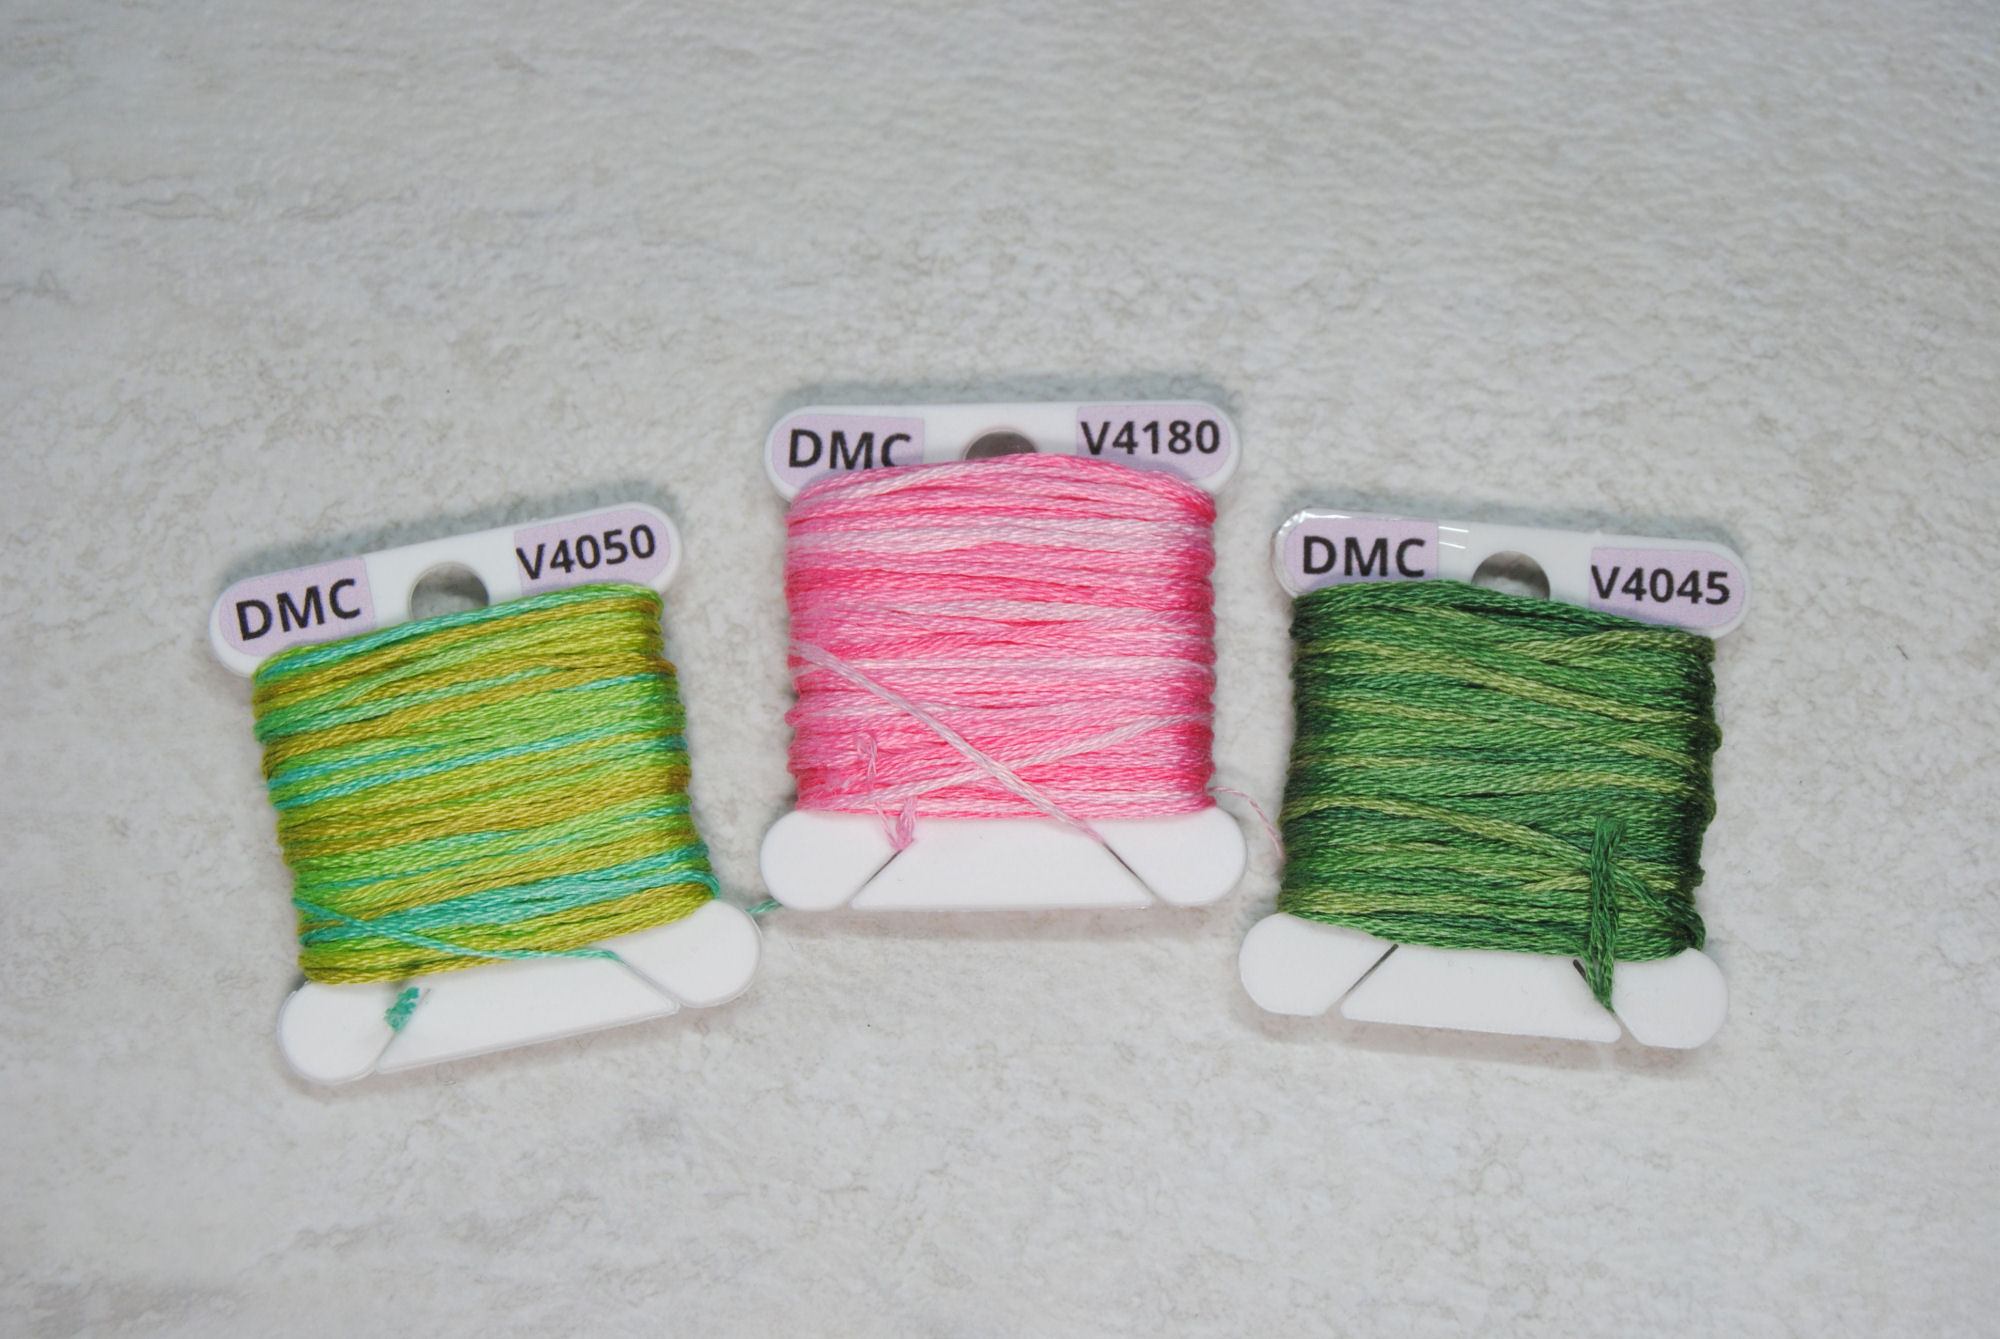 DMC - Variegated Embroidery Floss - Various